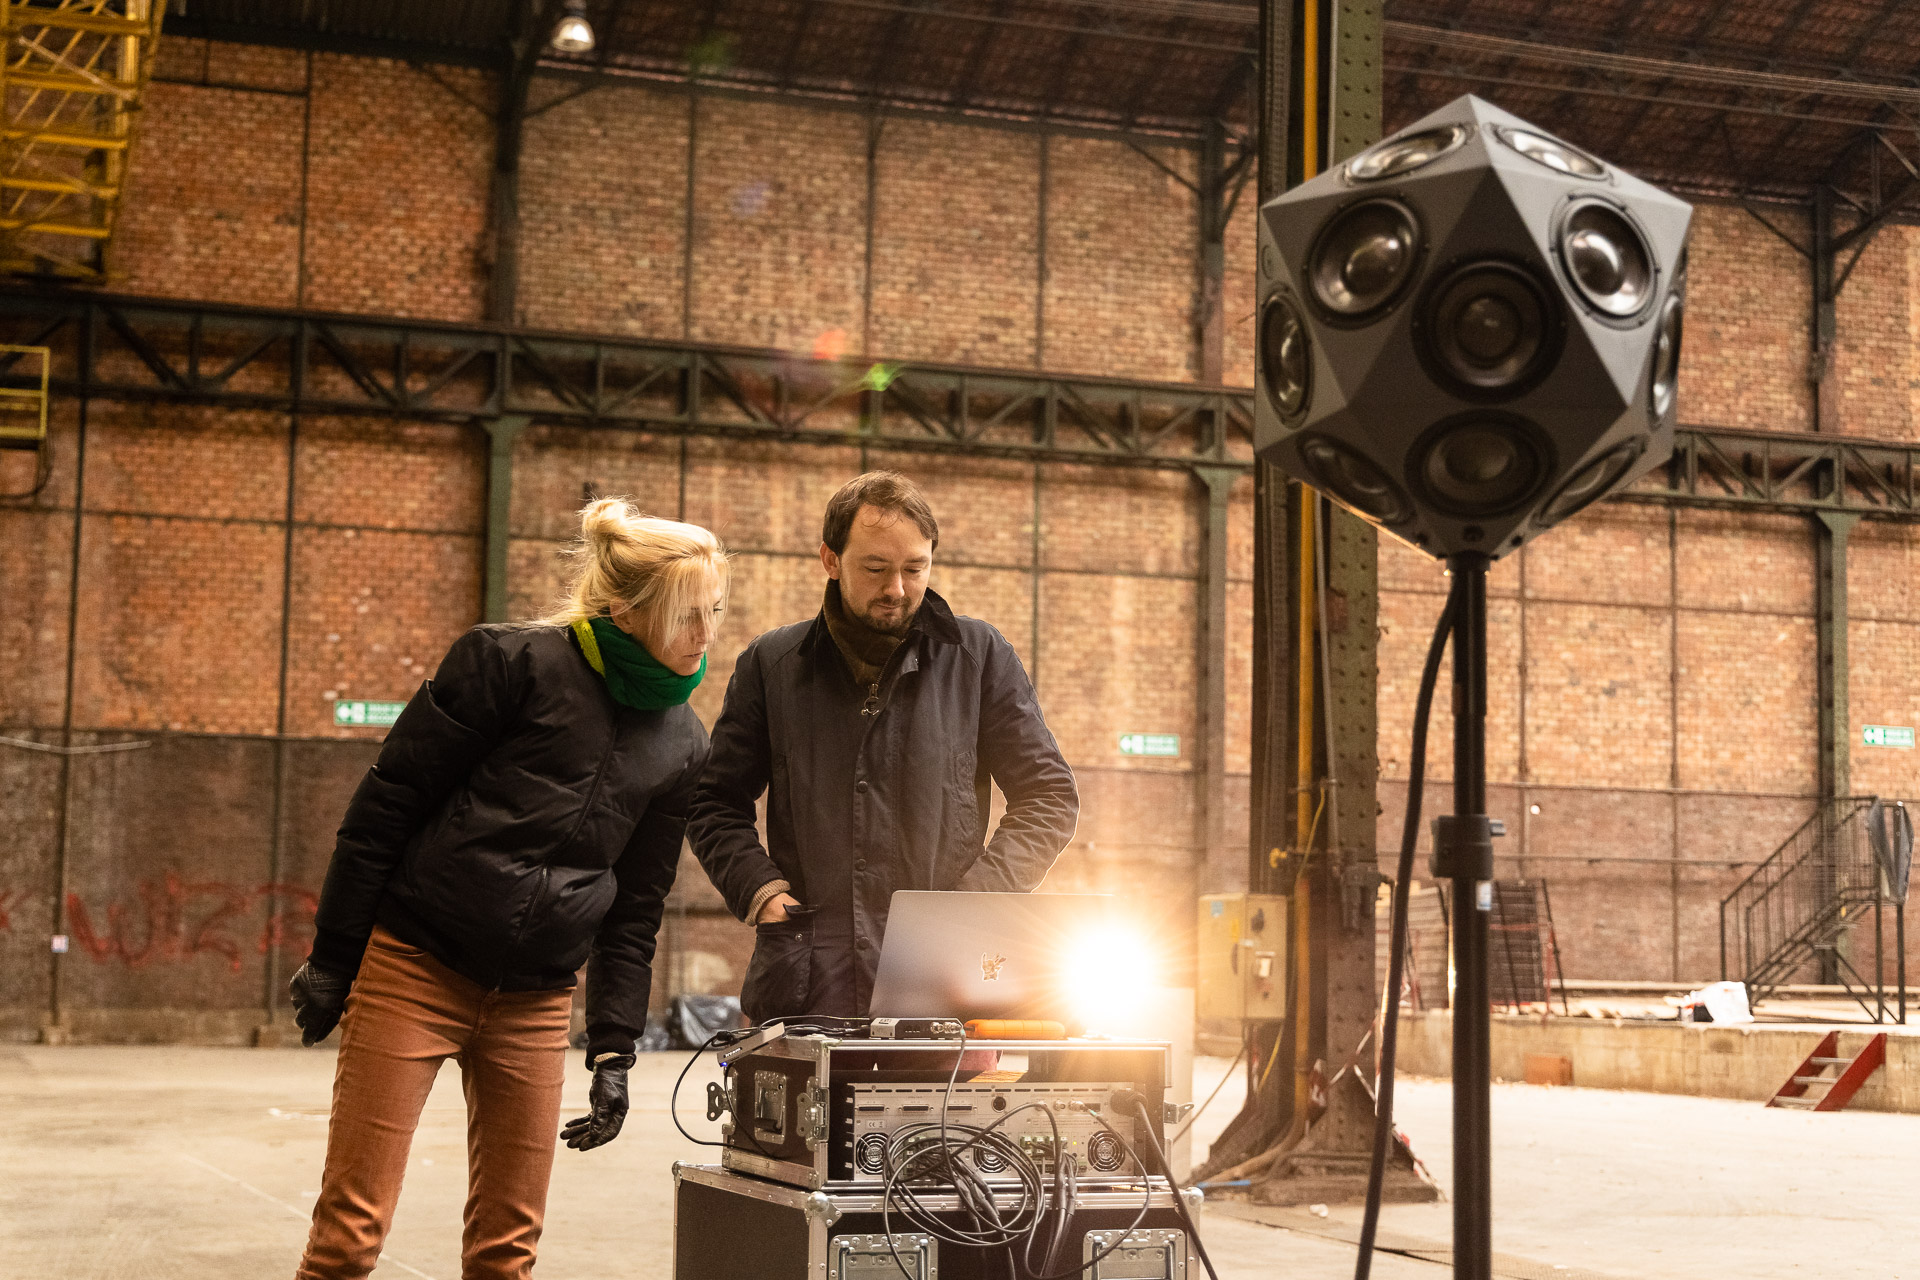 Nadine Schütz and Andrew Knight-Hill with the IKO in the large industrial warehouse of Grande Salle Pantin